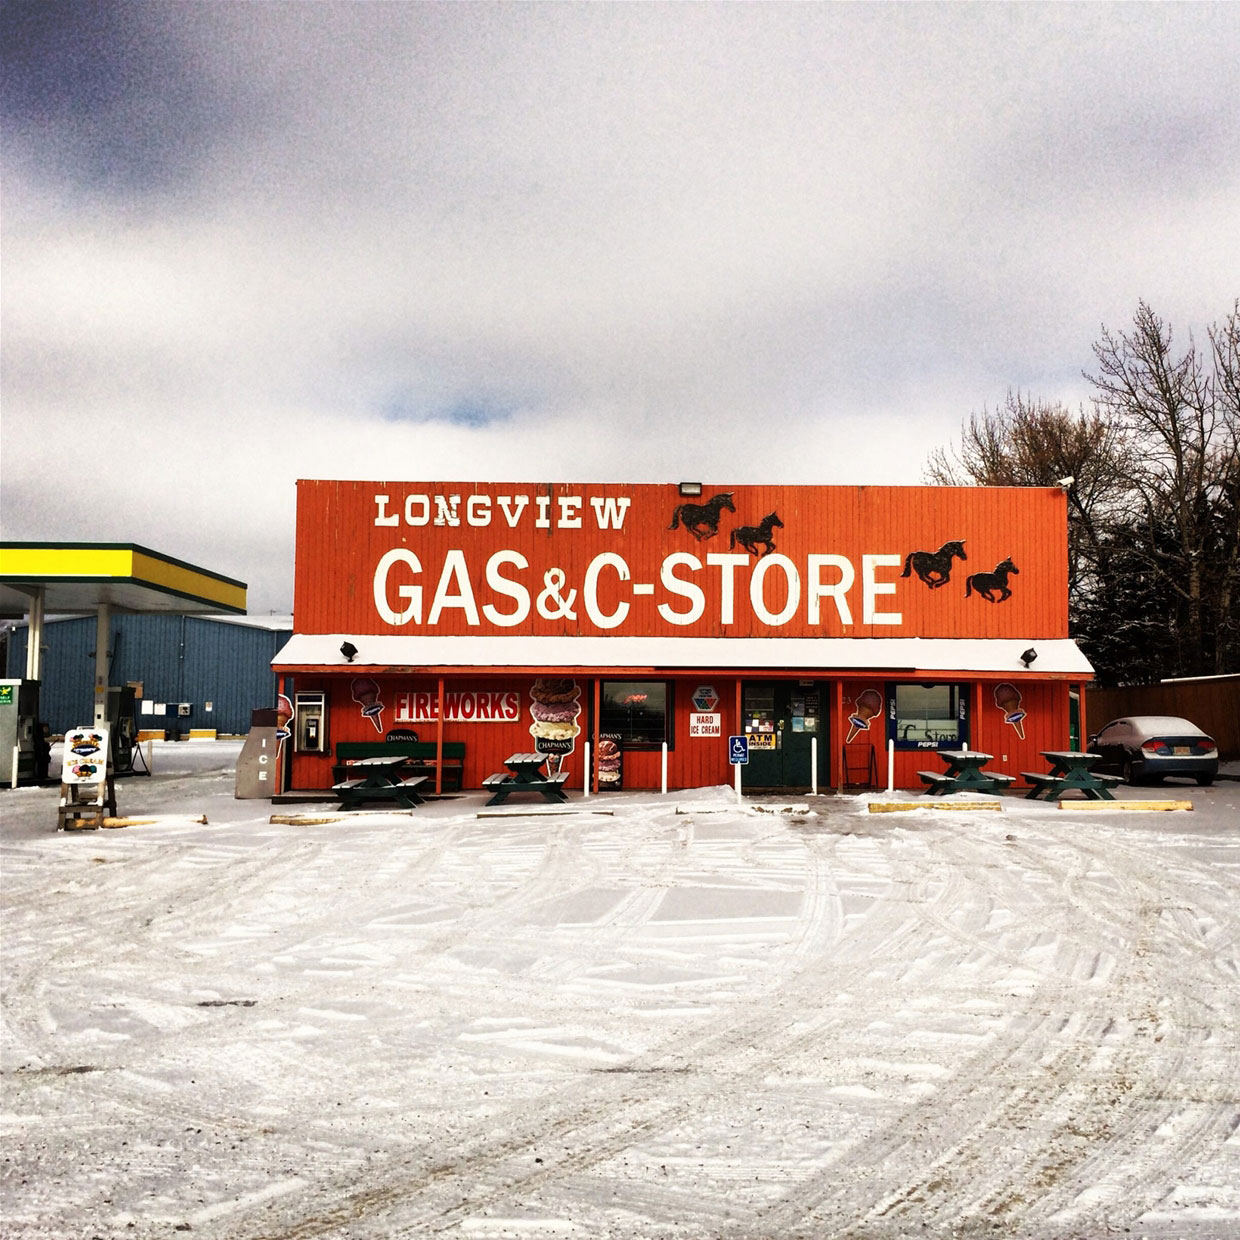 Gas & C-Store